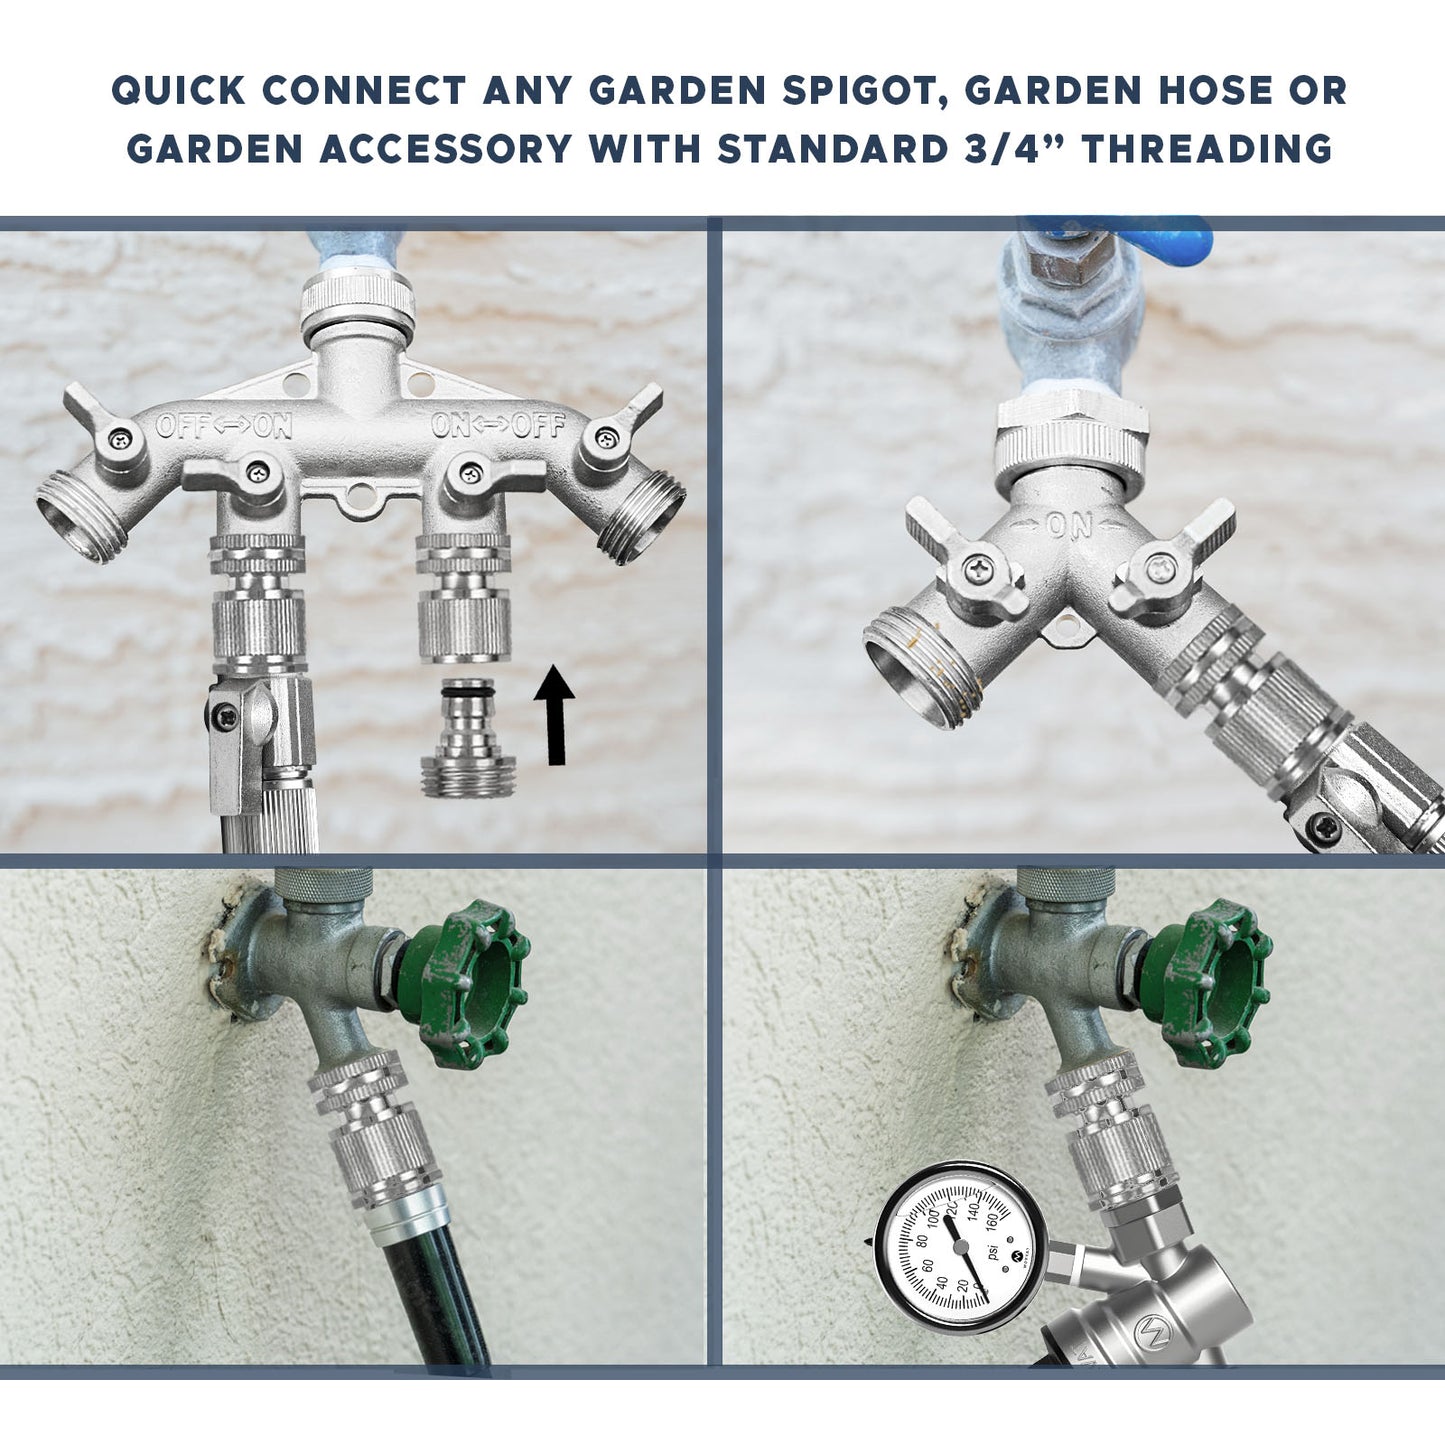 Nickel Plated Brass Quick Connect Garden Hose Fittings for Source & Accessory